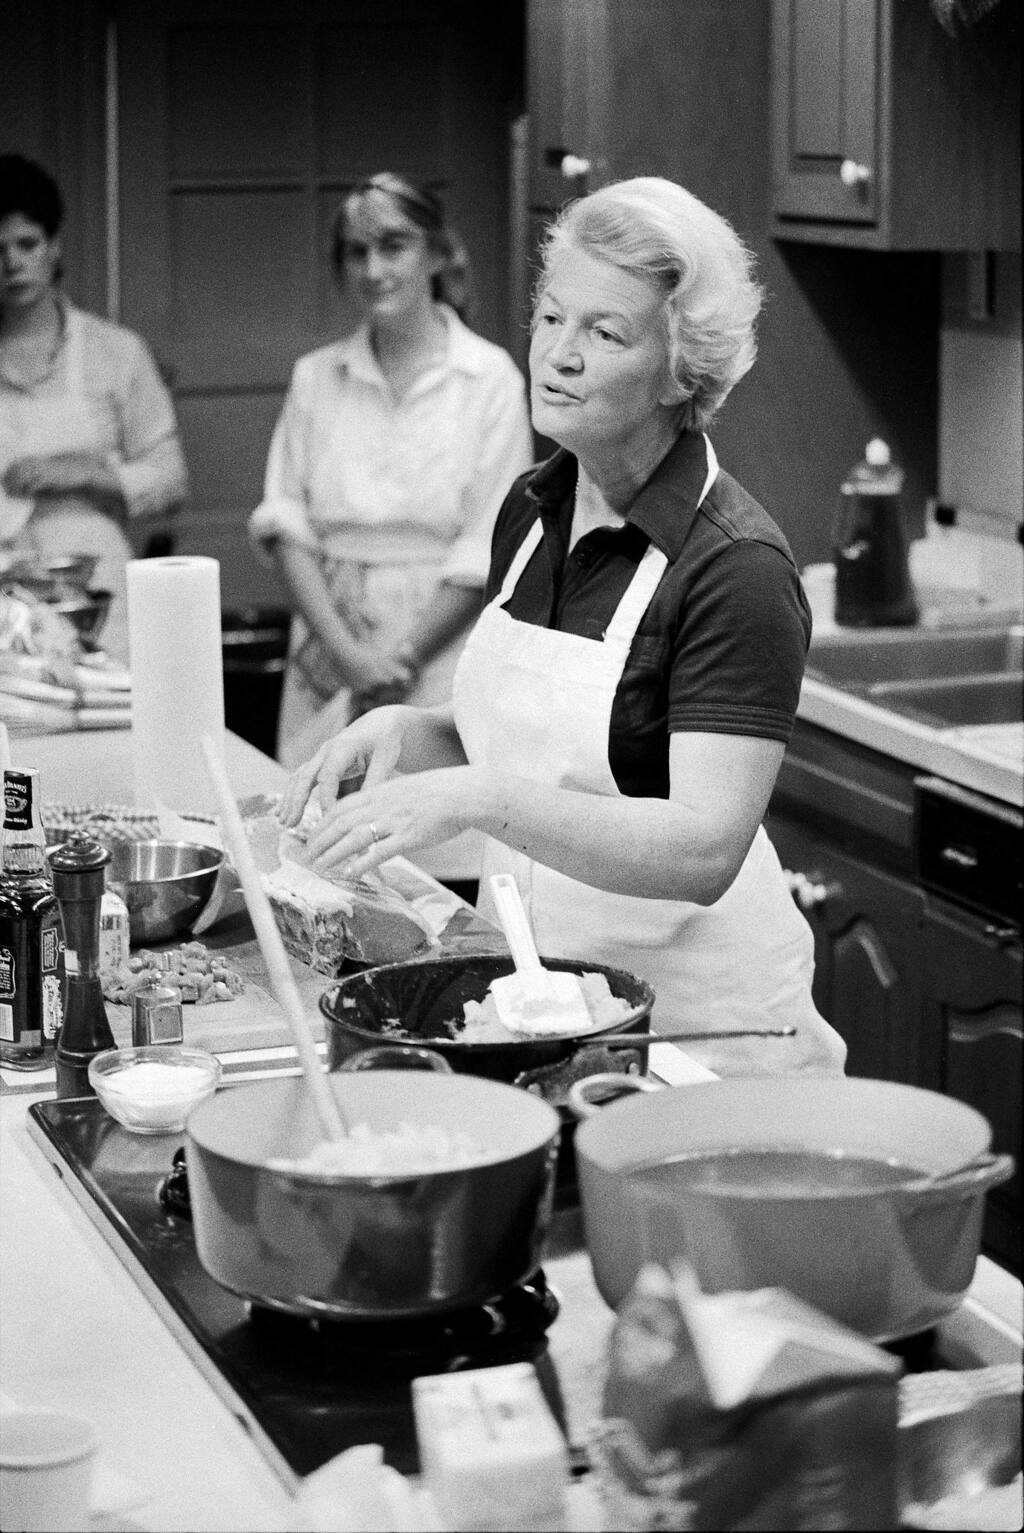 Paul Hosefros/The New York TimesMadeleine Kamman giving a cooking class at L'academie de Cuisine in Bethesda, Md., in 1984. Kamman, renowned French chef and teacher, also co-founded the School for American Chefs at Beringer Vineyards in St. Helena.